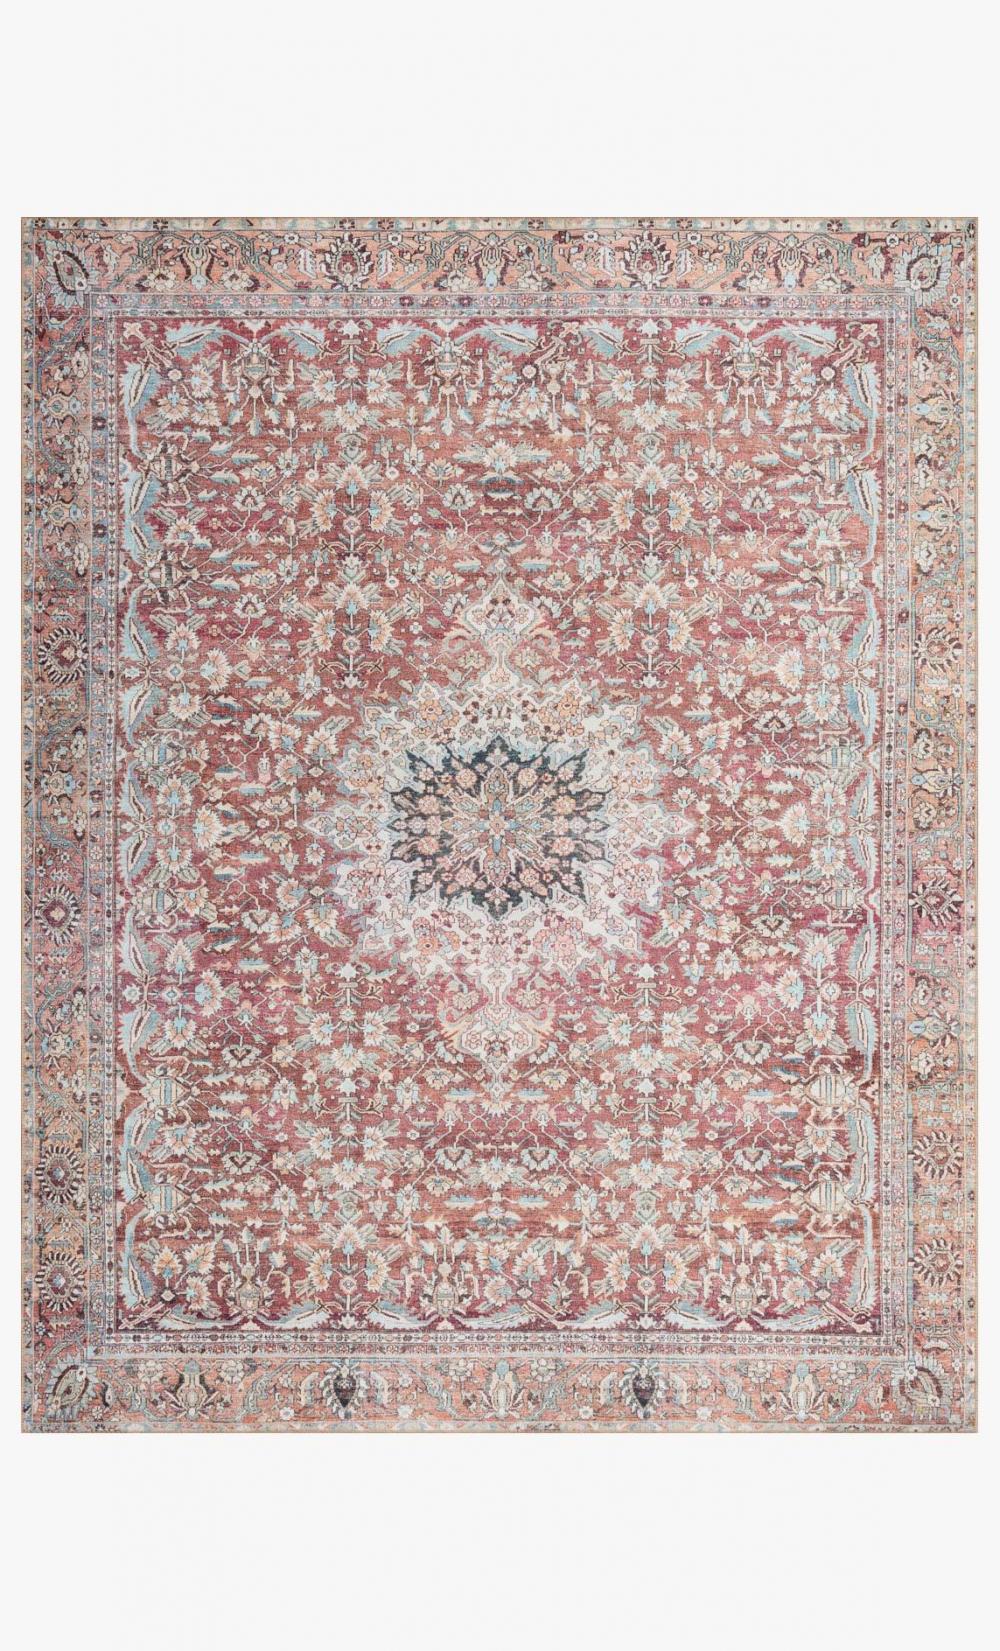 A versatile and elegant rug, perfect for traditional, contemporary, or transitional interiors.